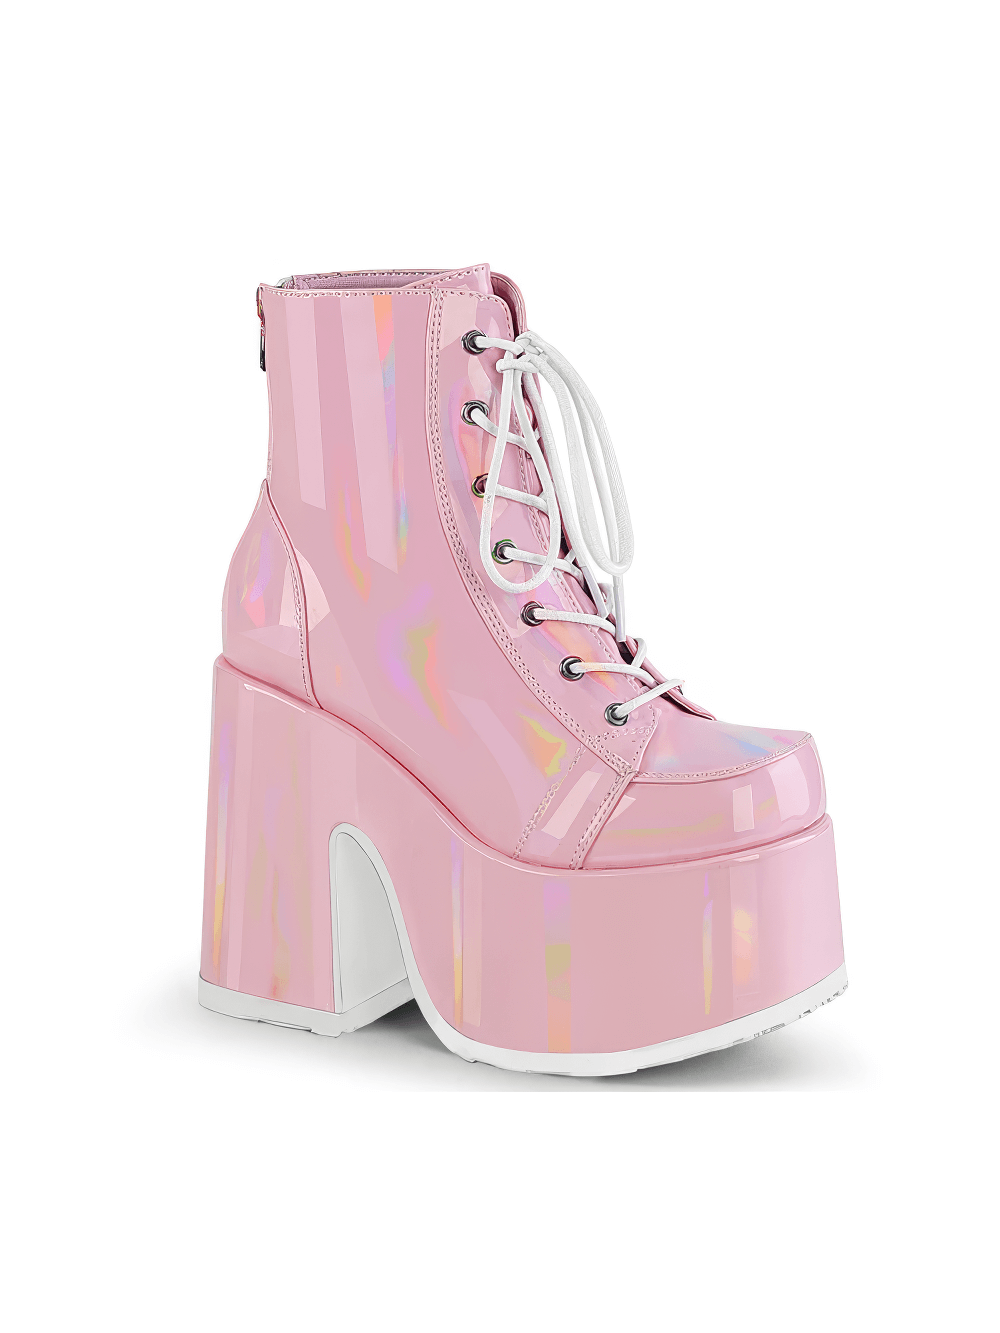 DEMONIA Chunky Heel Women's Pink Hologram Ankle Boots